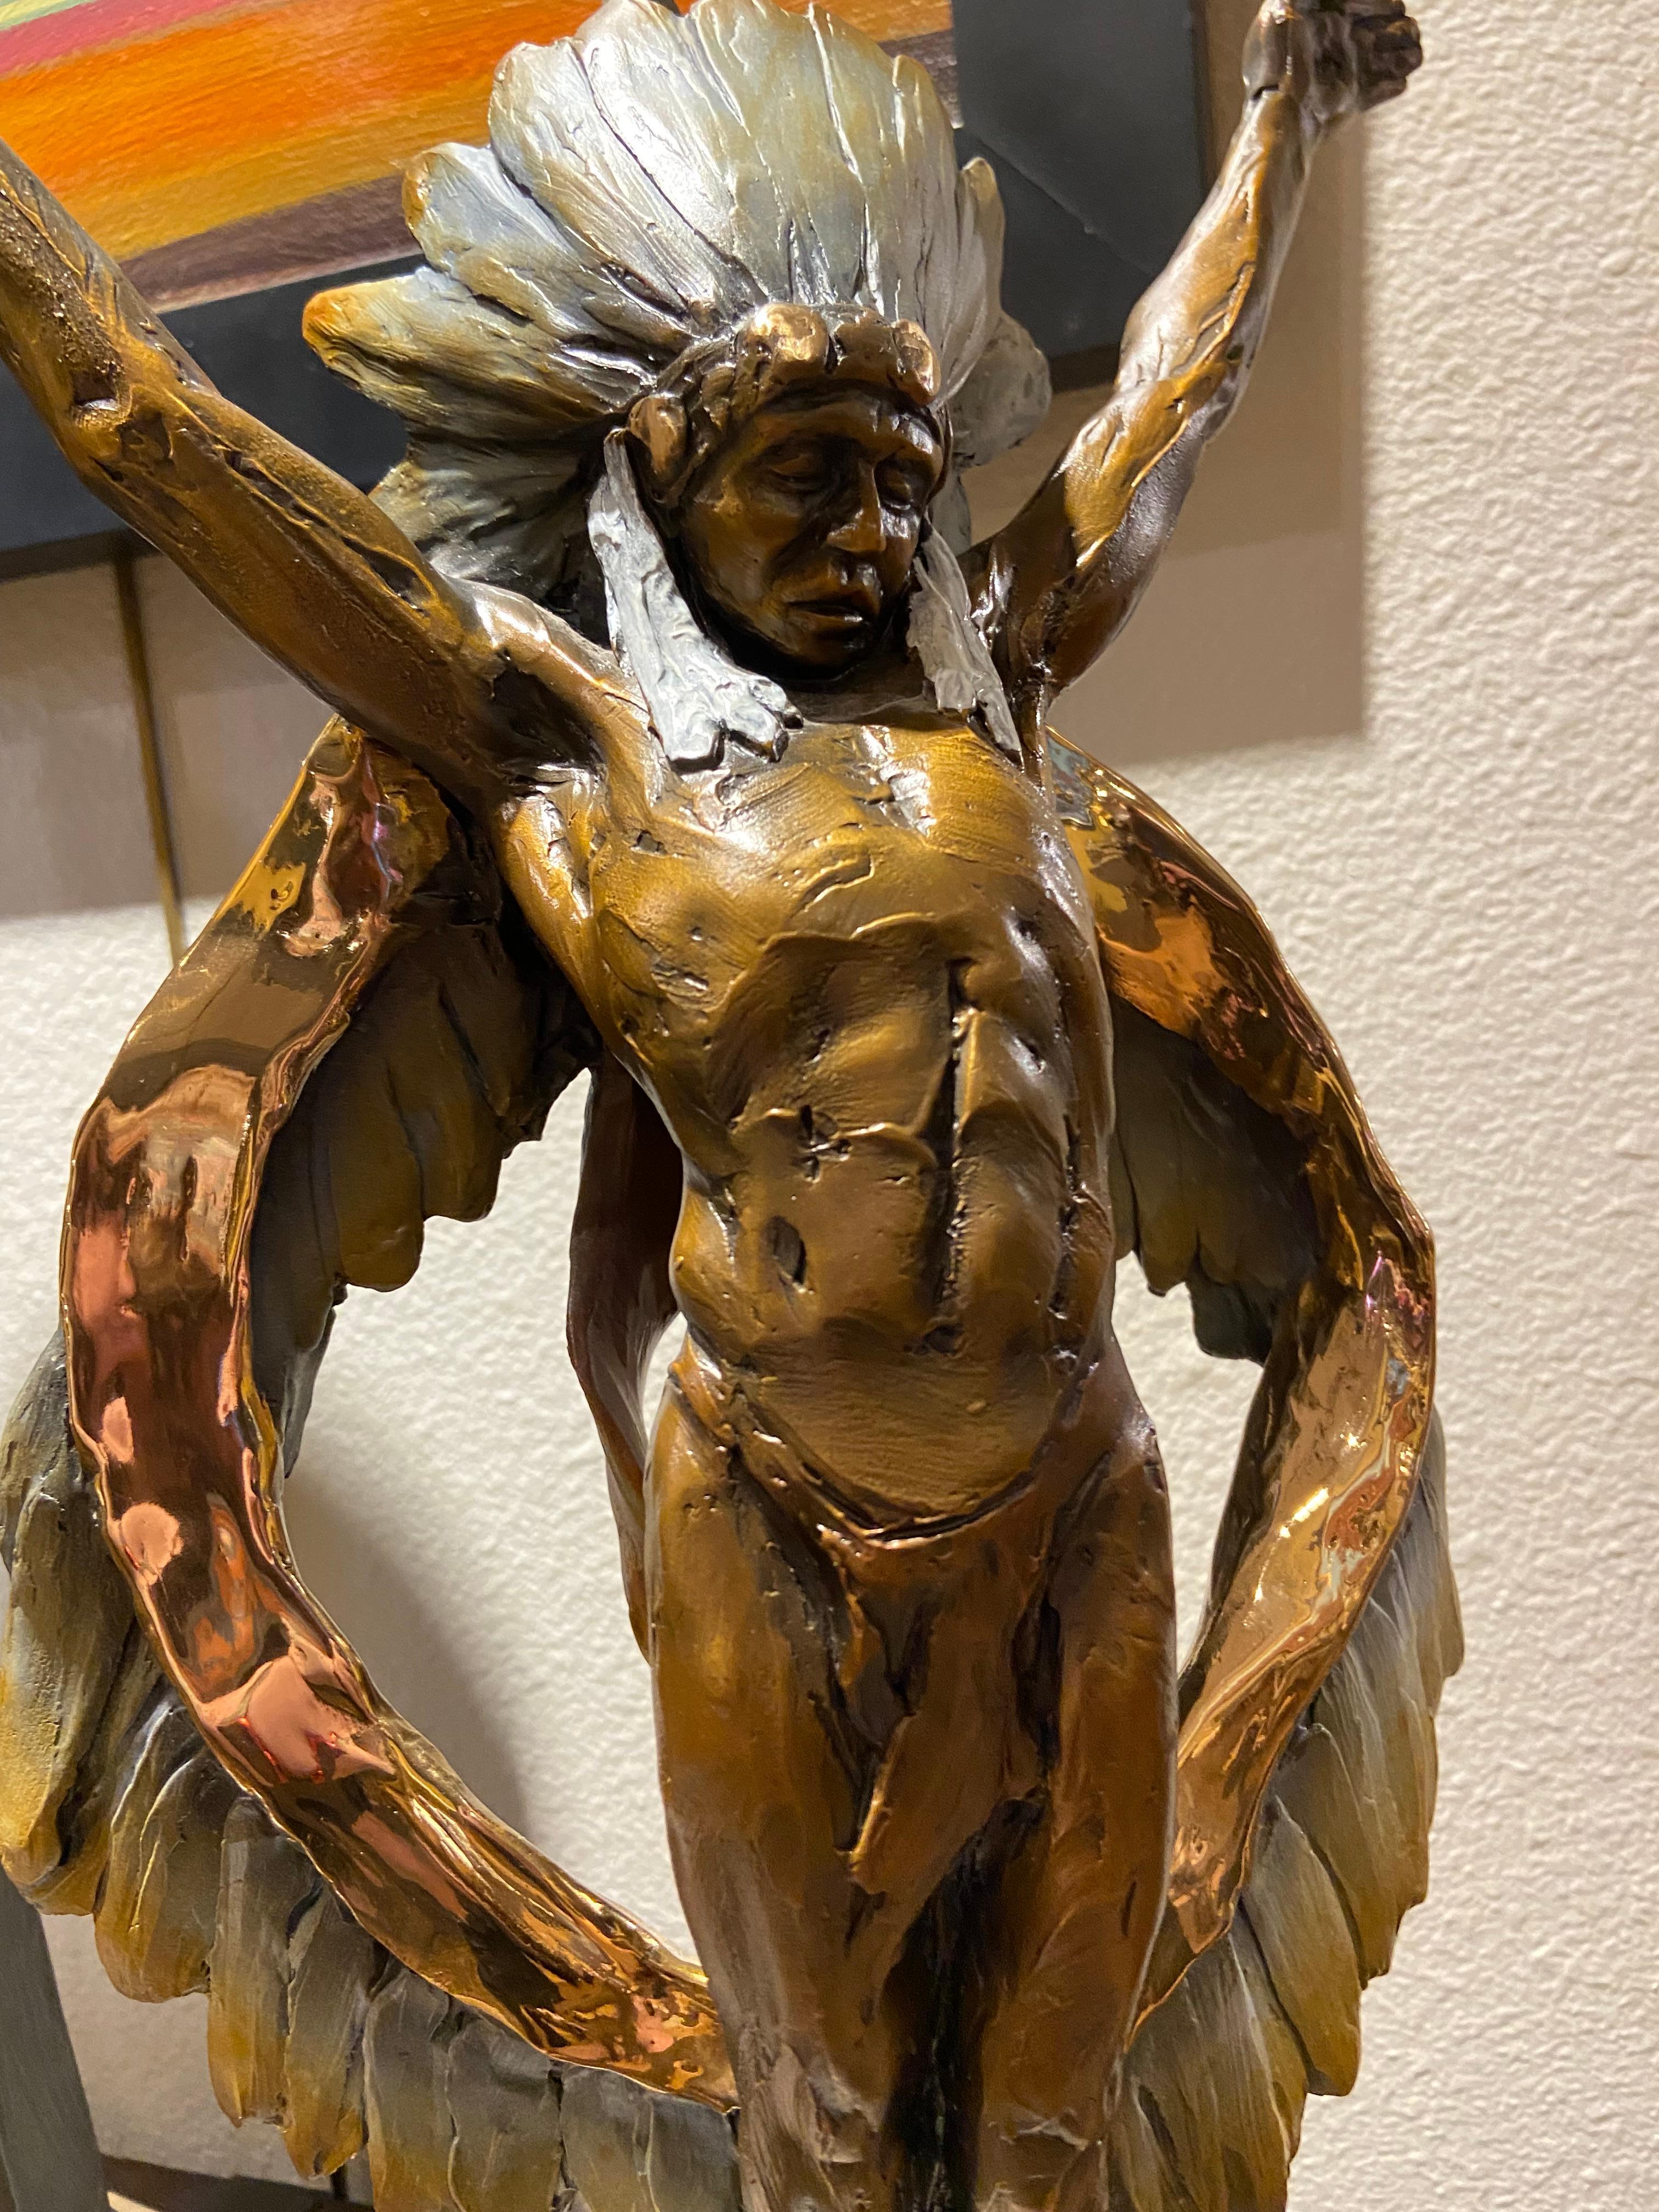 Committed - Gold Figurative Sculpture by Denny Haskew